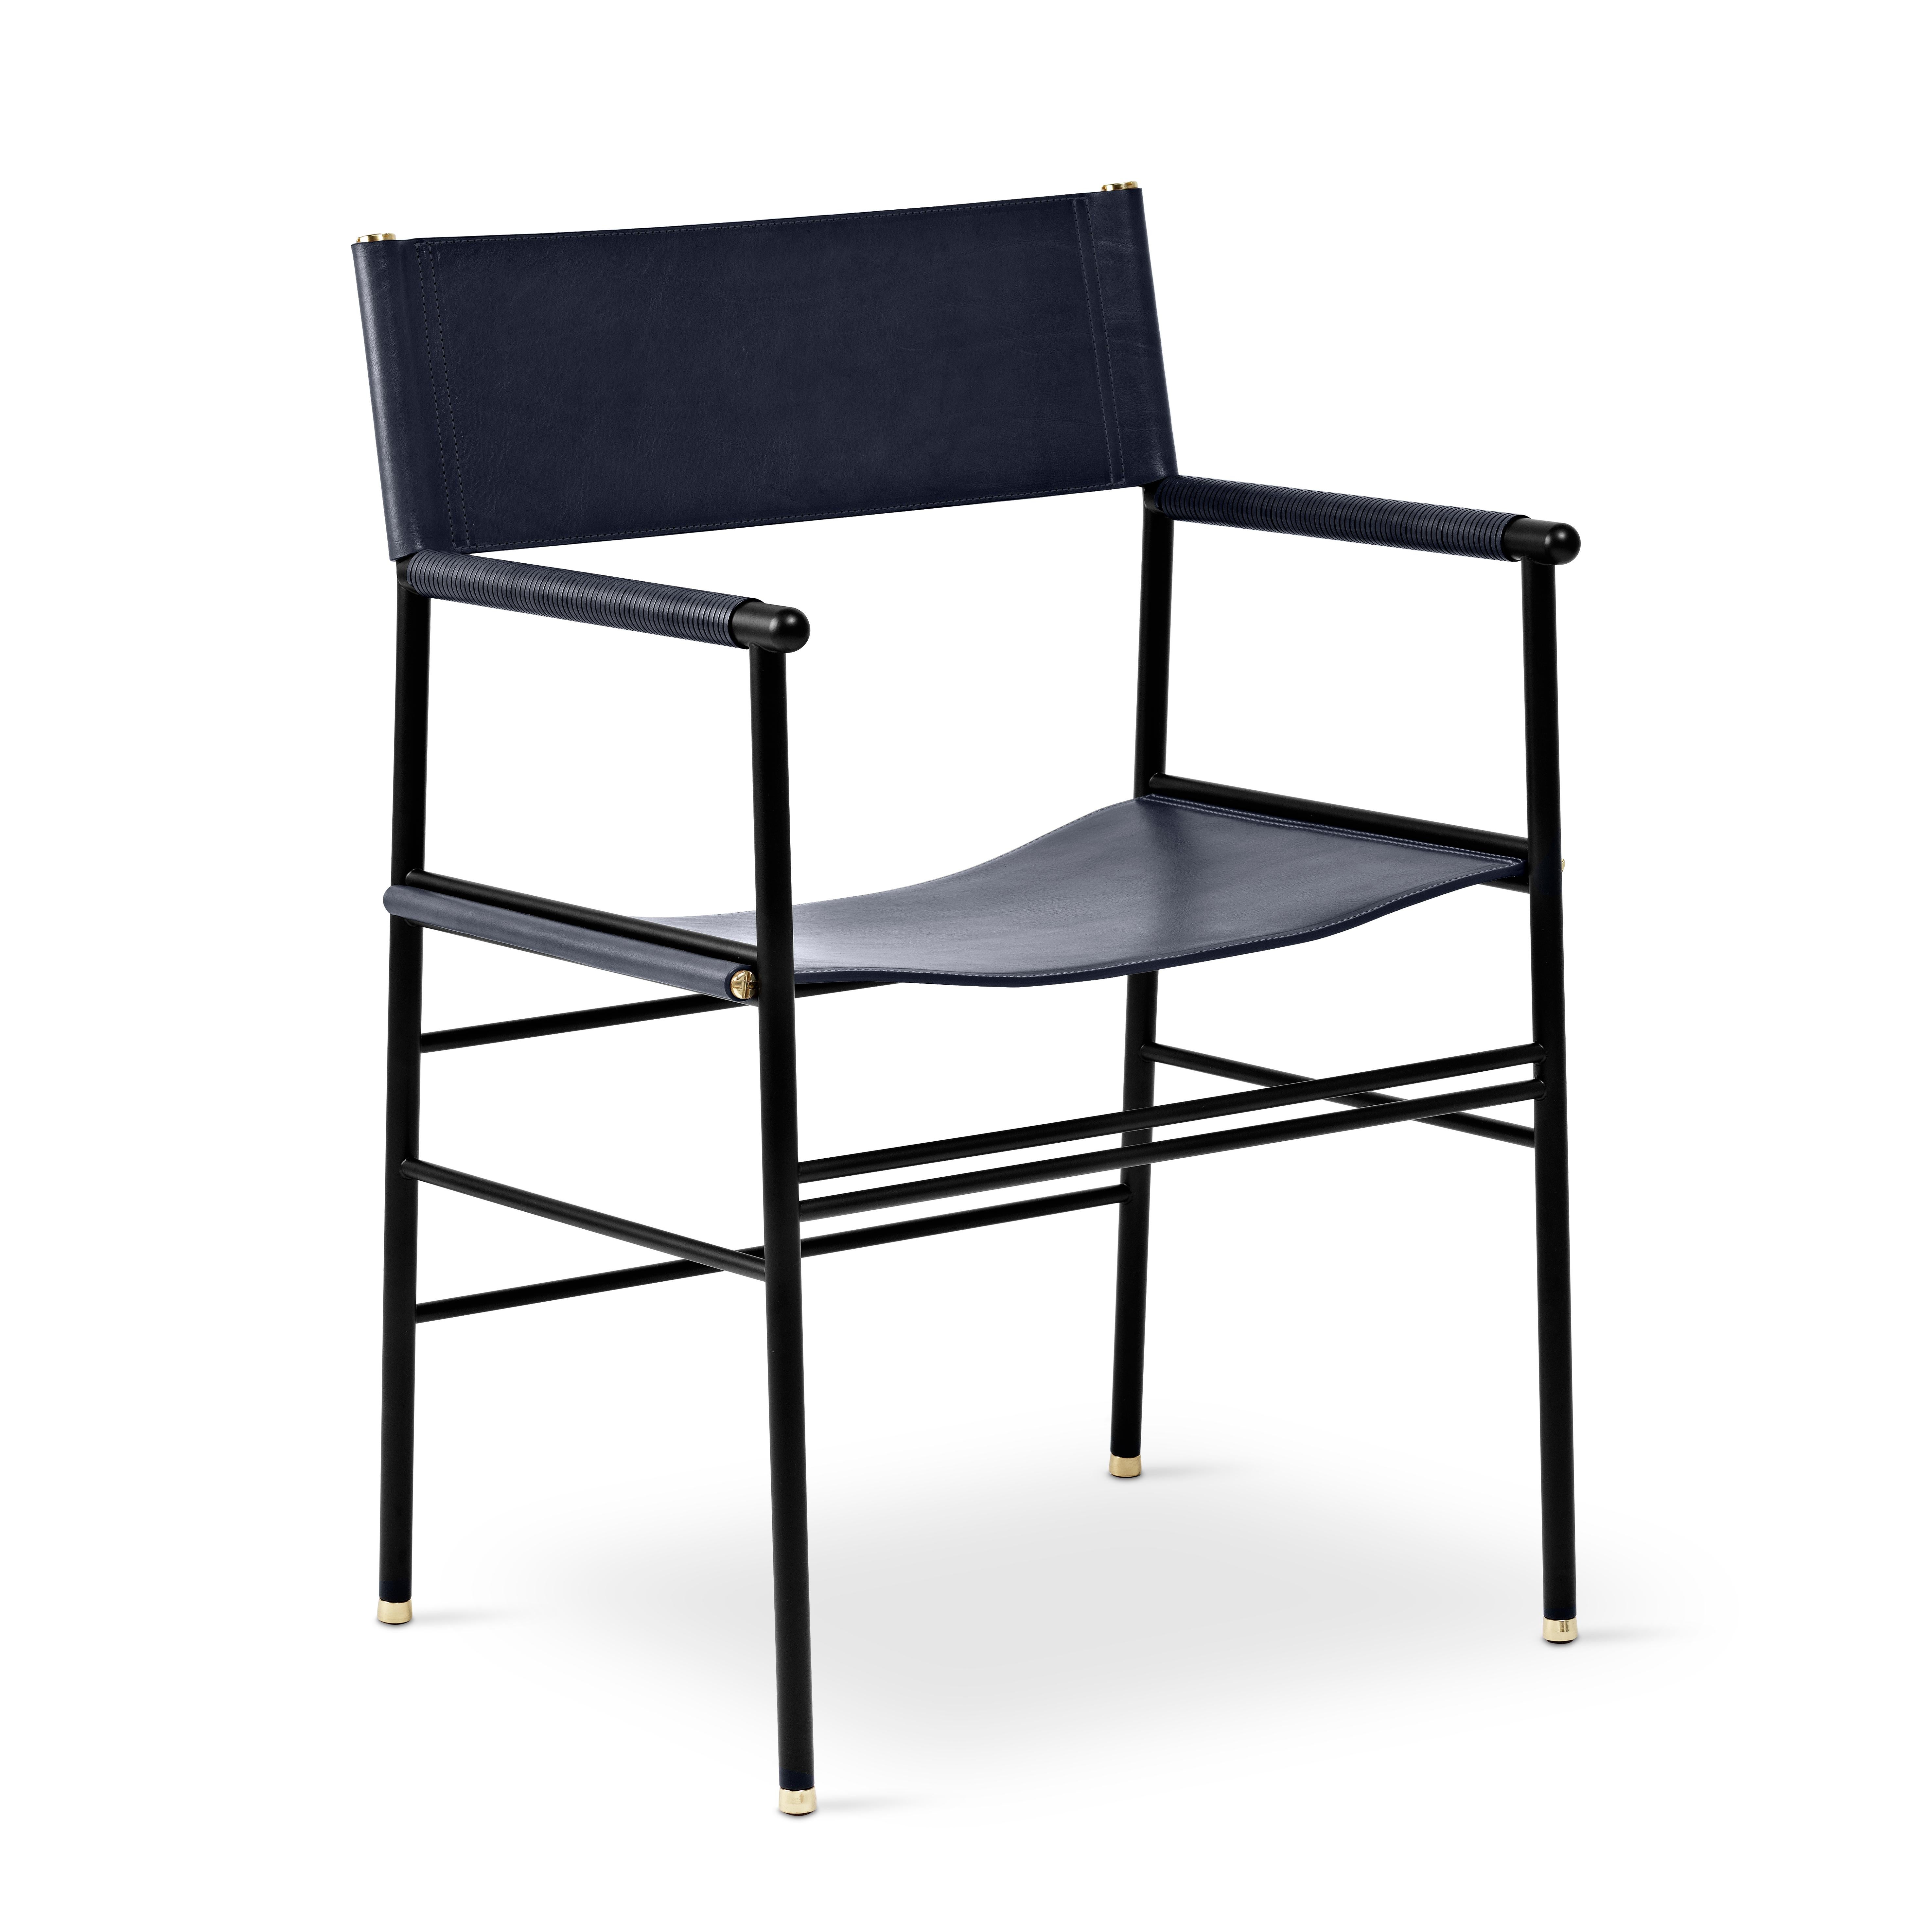 Spanish Set of 3 Classic Contemporary Chair Navy Blue Leather & Black Rubber Metal For Sale